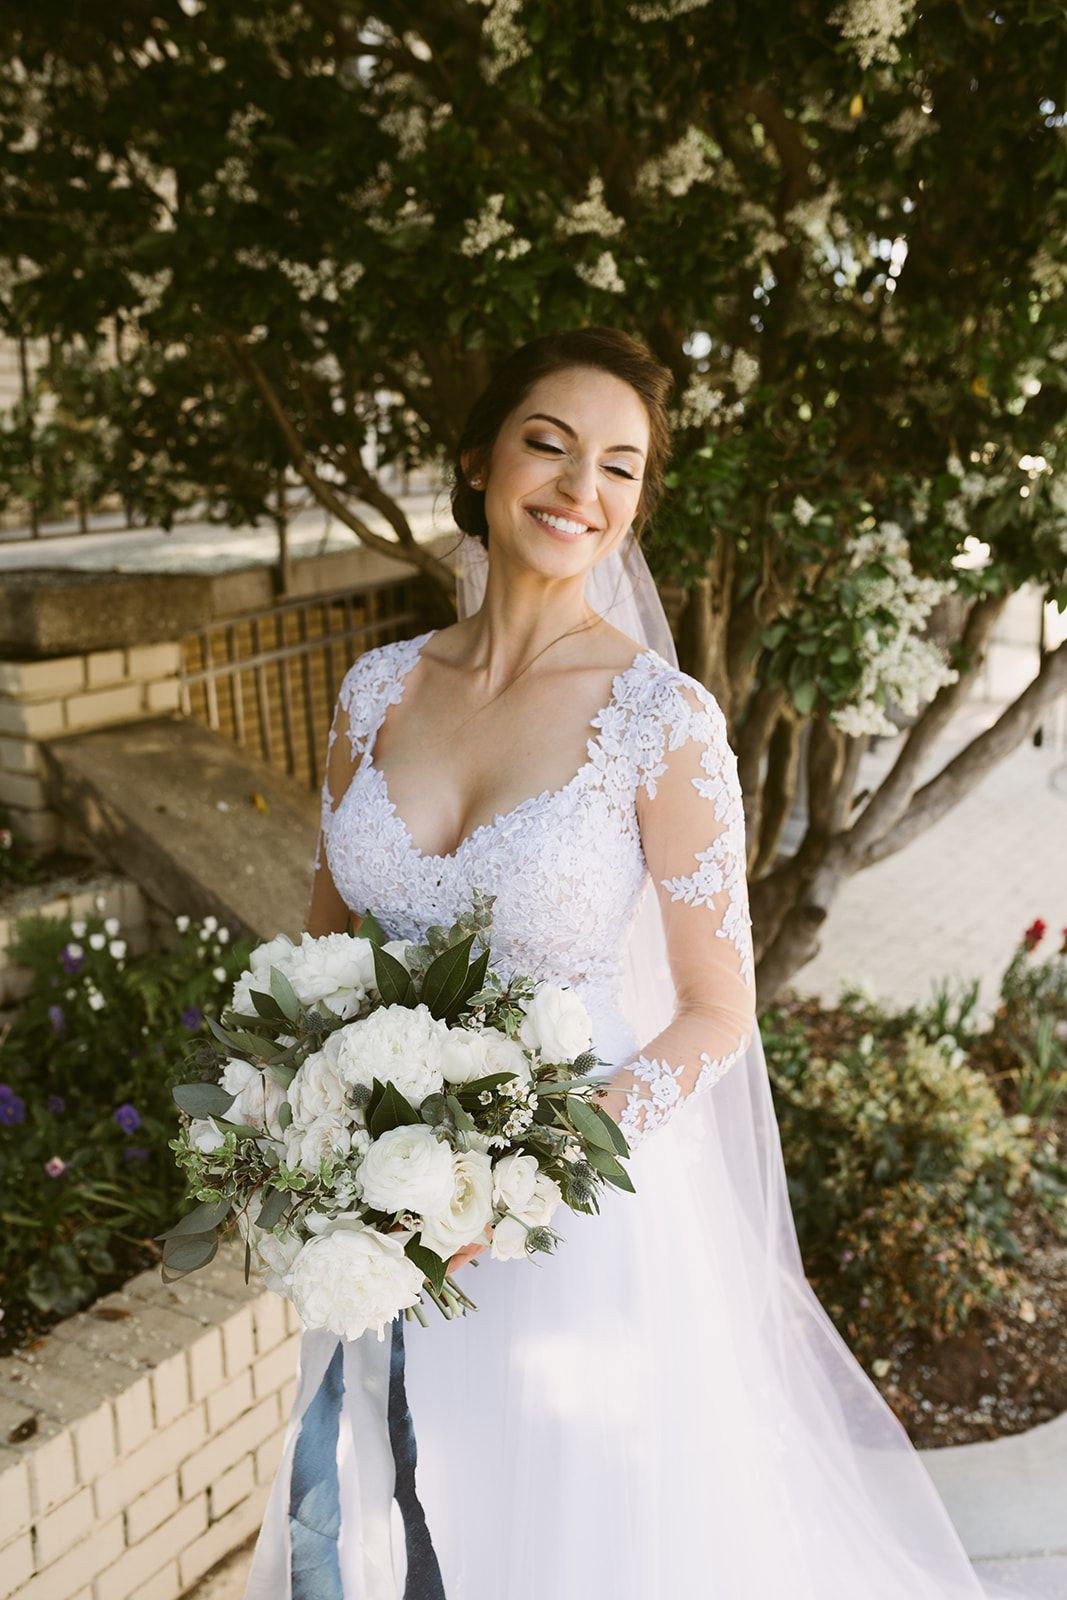 Wedding Gowns Charlotte Nc
 Pin by Separk Mansion on Bridal Portraits